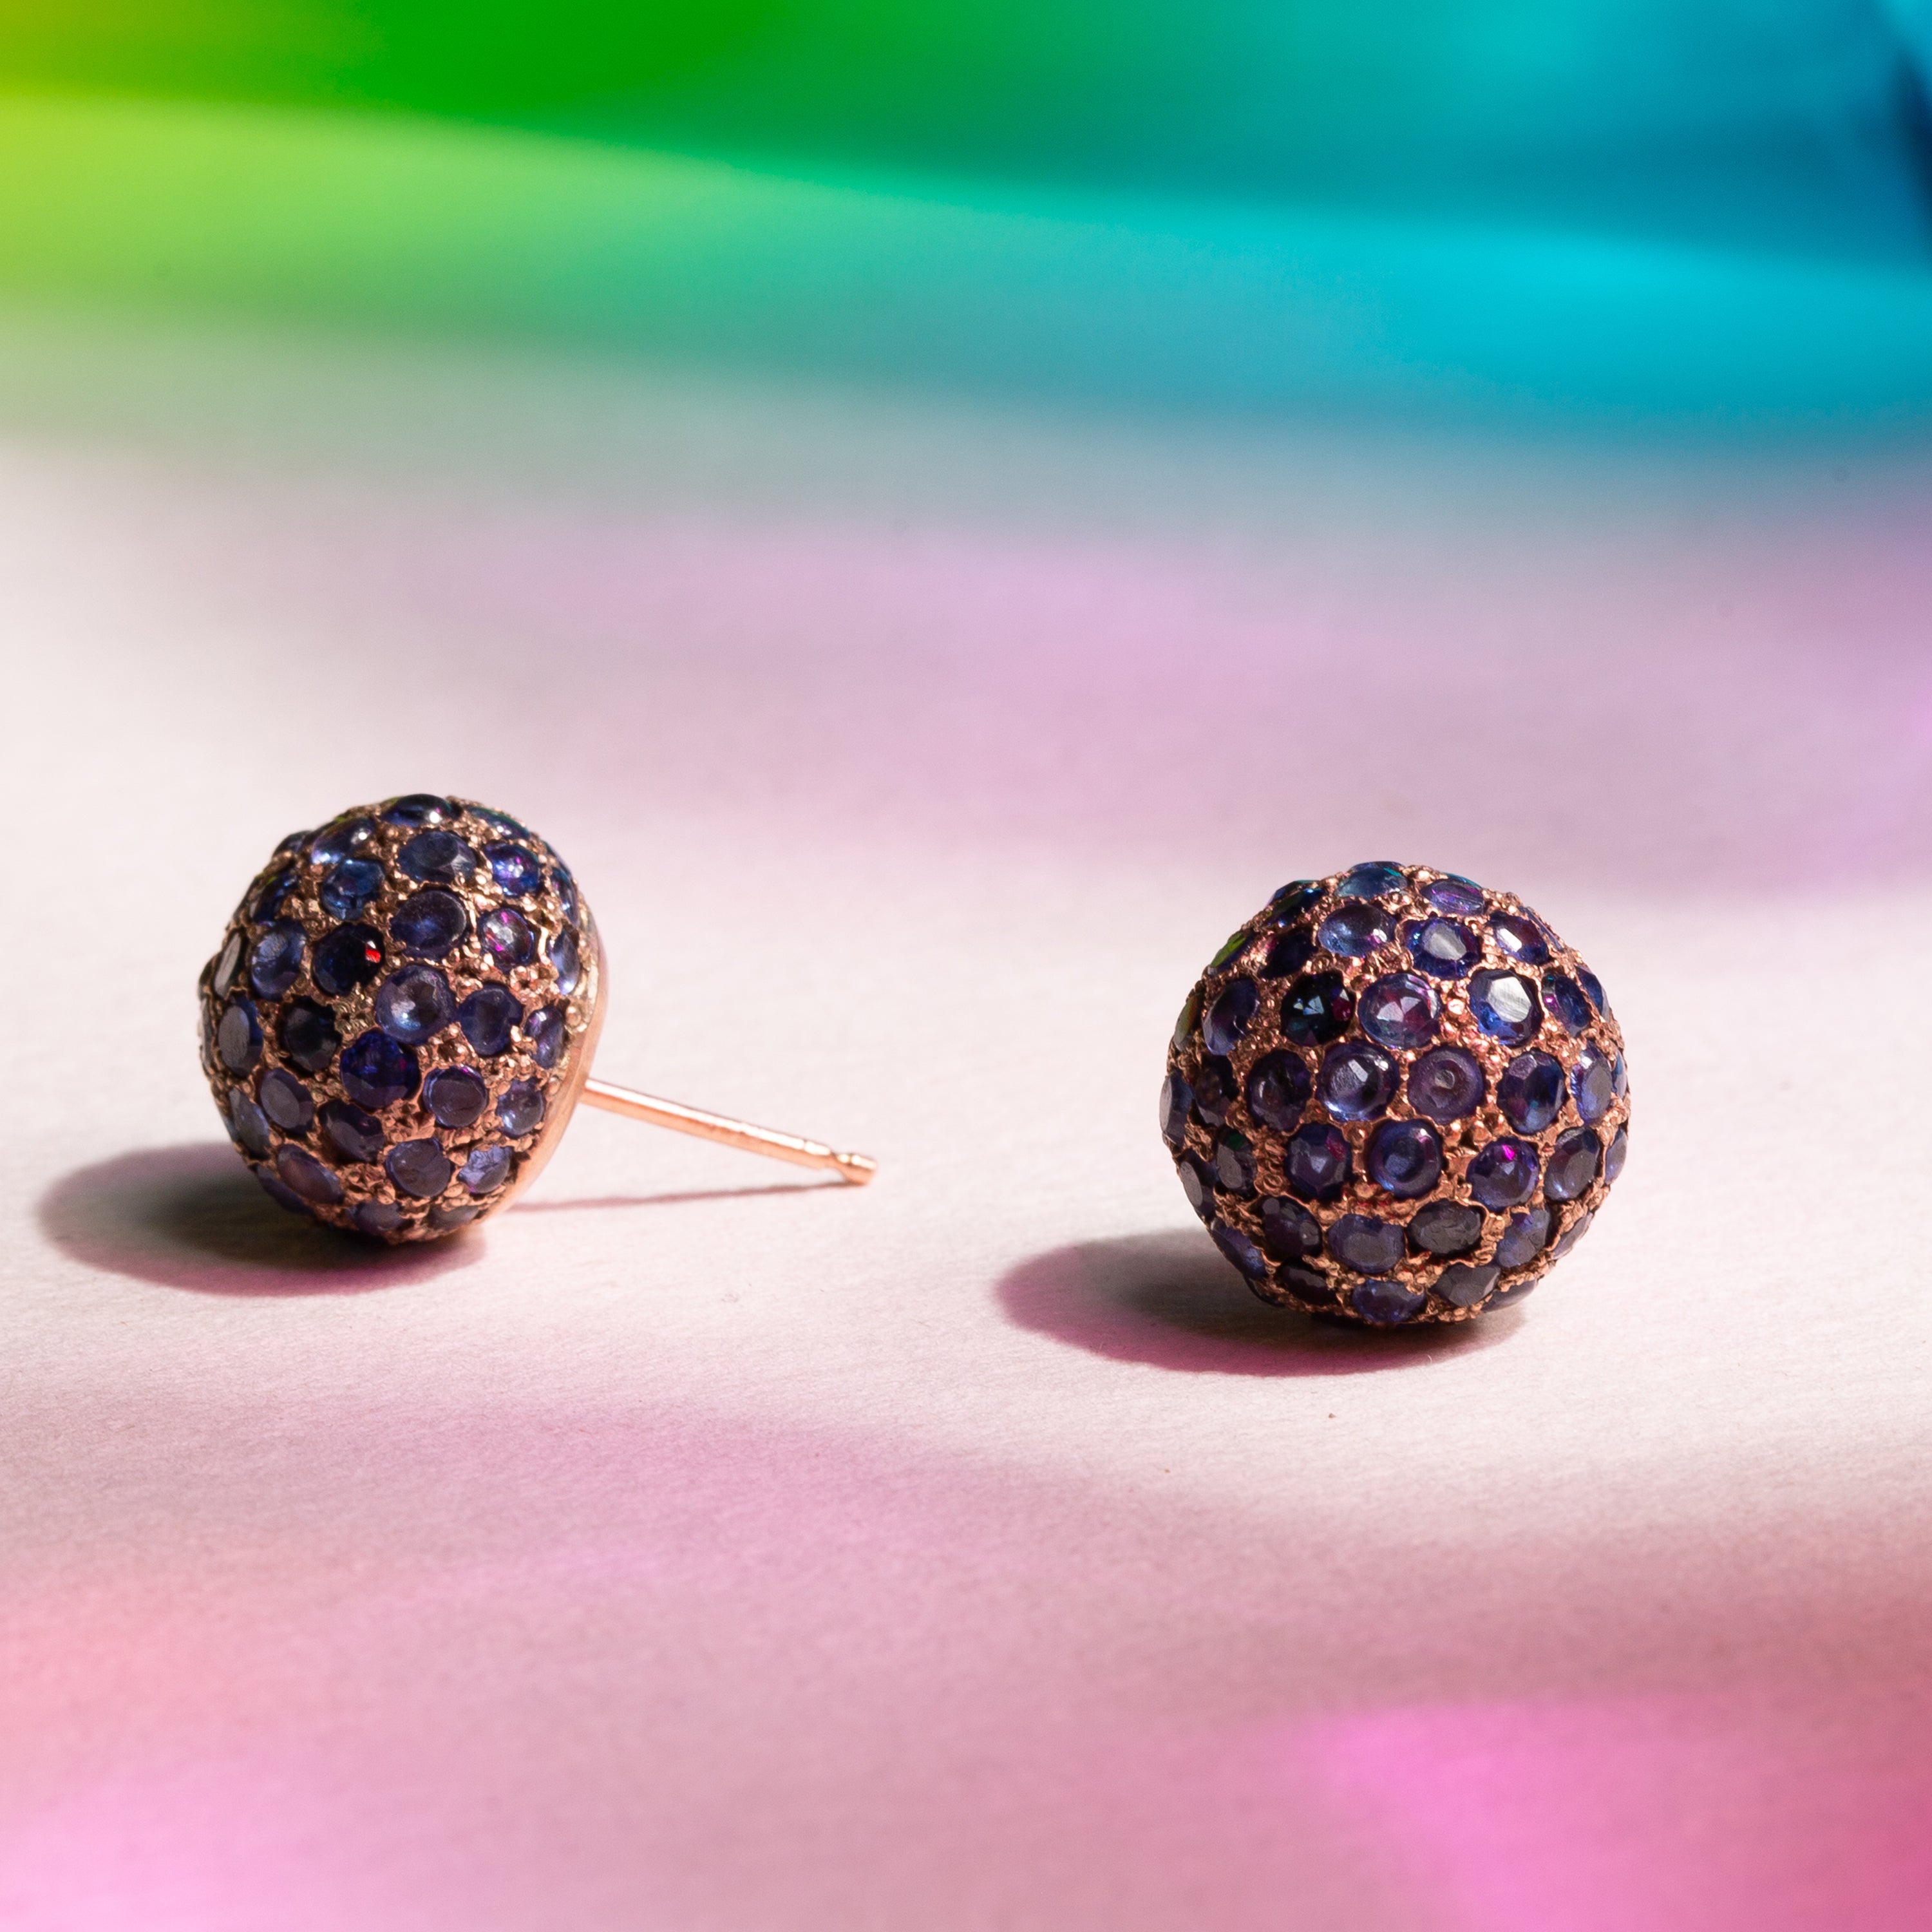 Pave Sapphire and 14k Gold Ball Earrings